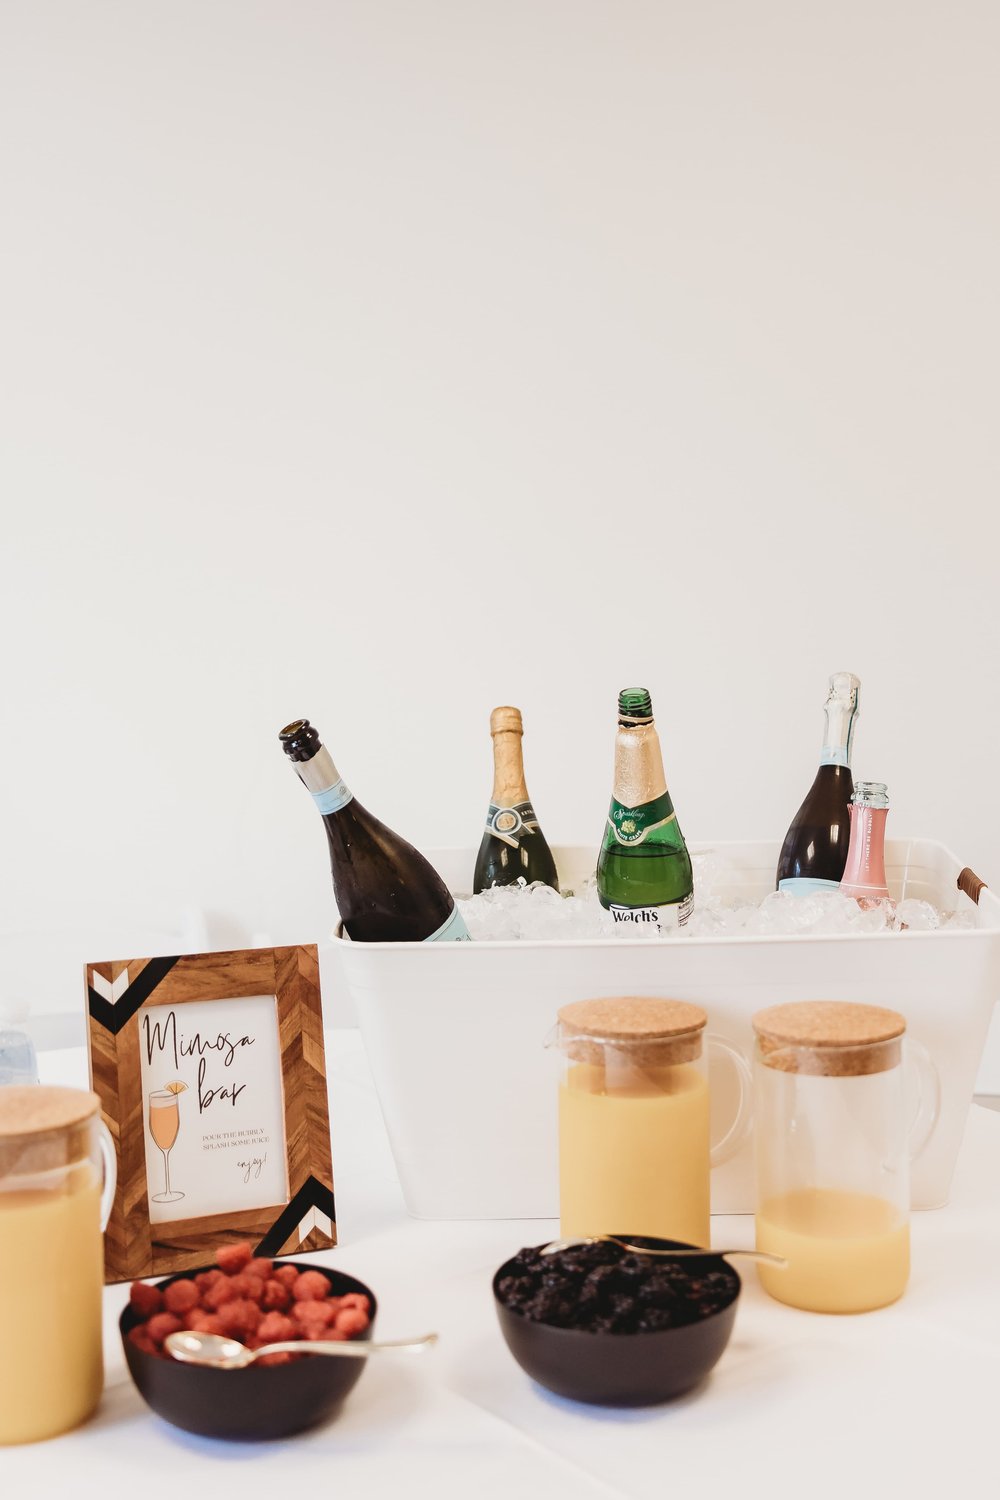  a photo of the mimosa bar at a bridal shower—bottles on ice, raspberries in a bowl, containers of orange juice 